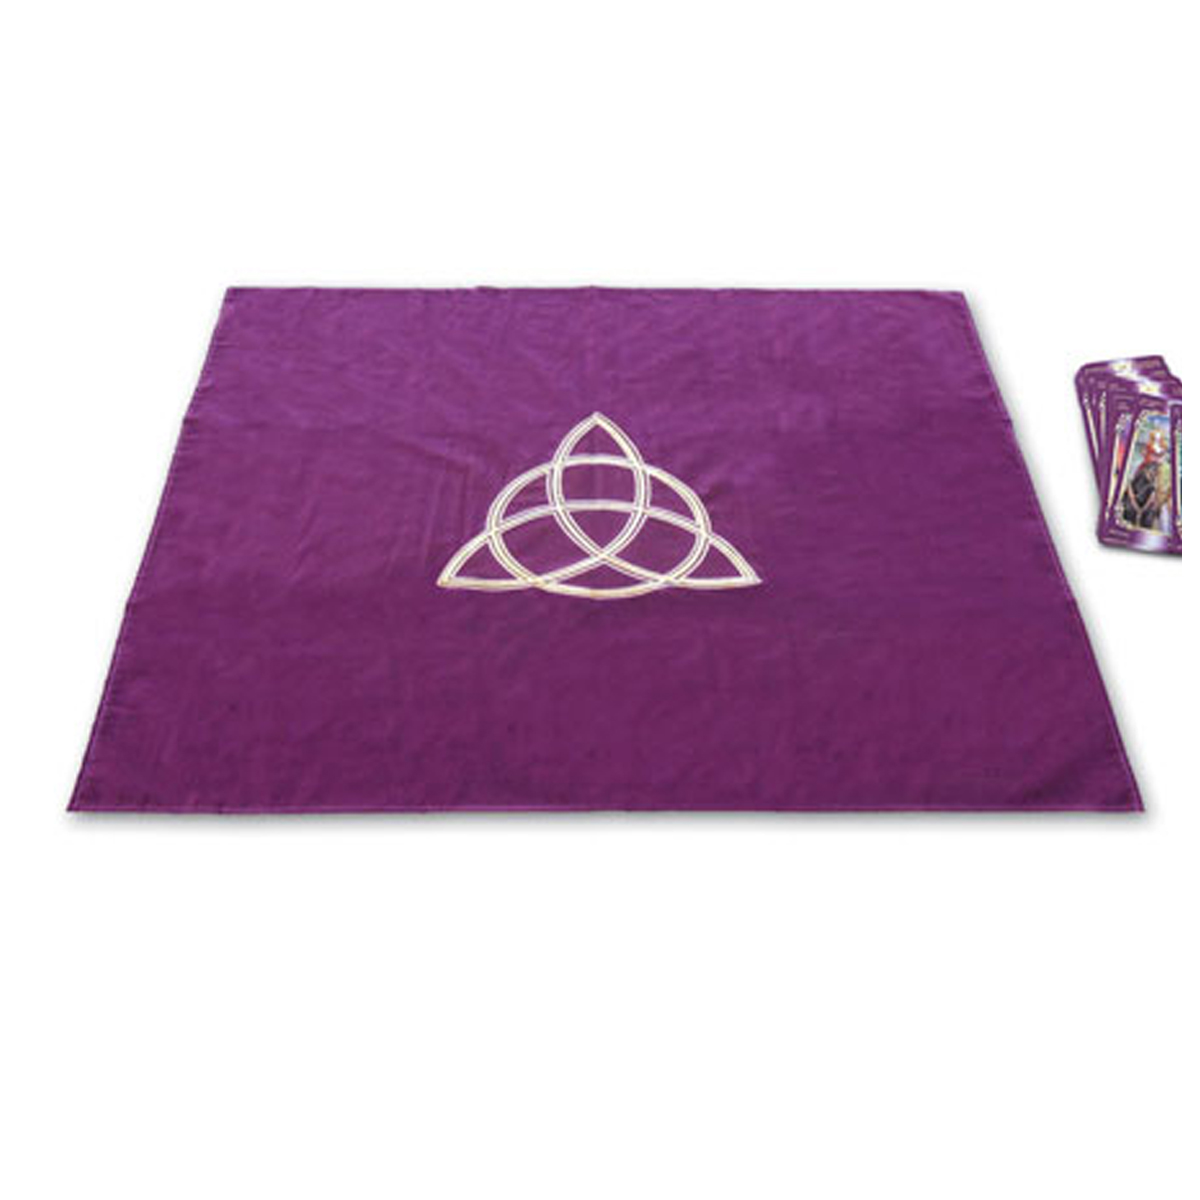 Tapis velours \'Wicca\' violet - 80x80 cm - [A1474]